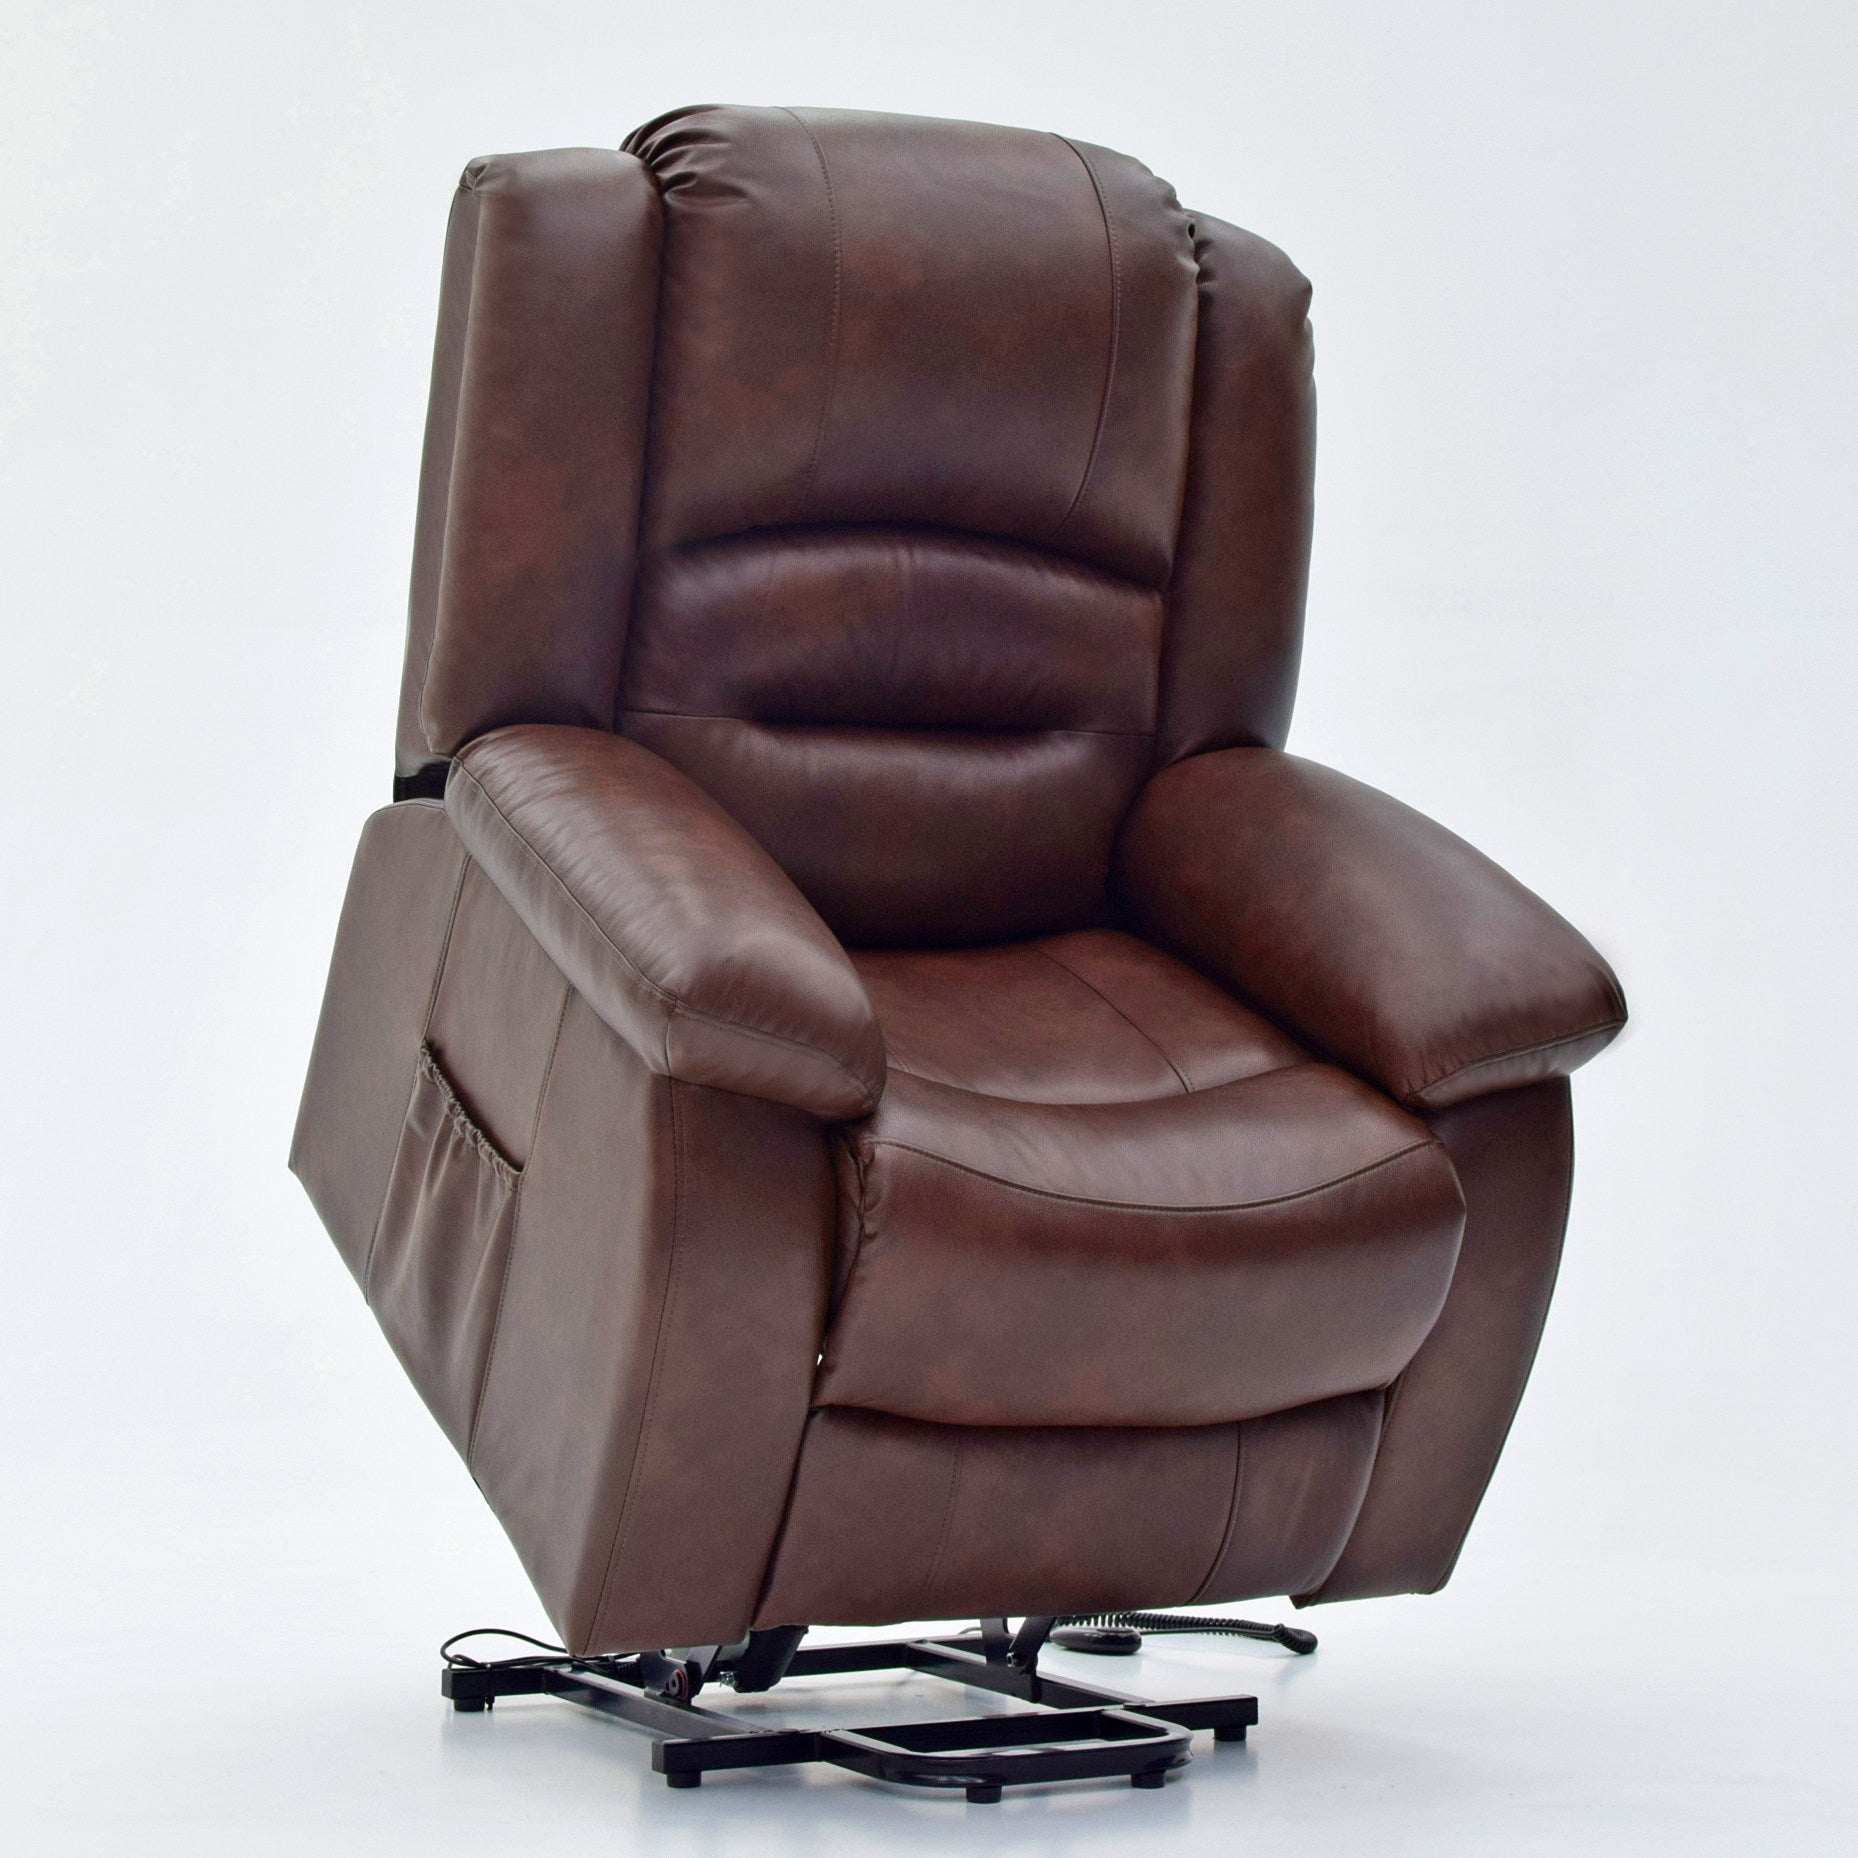  U-MAX Lift Recliner Power Lift Chair for Elderly Wall Hugger PU  Leather with Remote Control (Brown) : Home & Kitchen